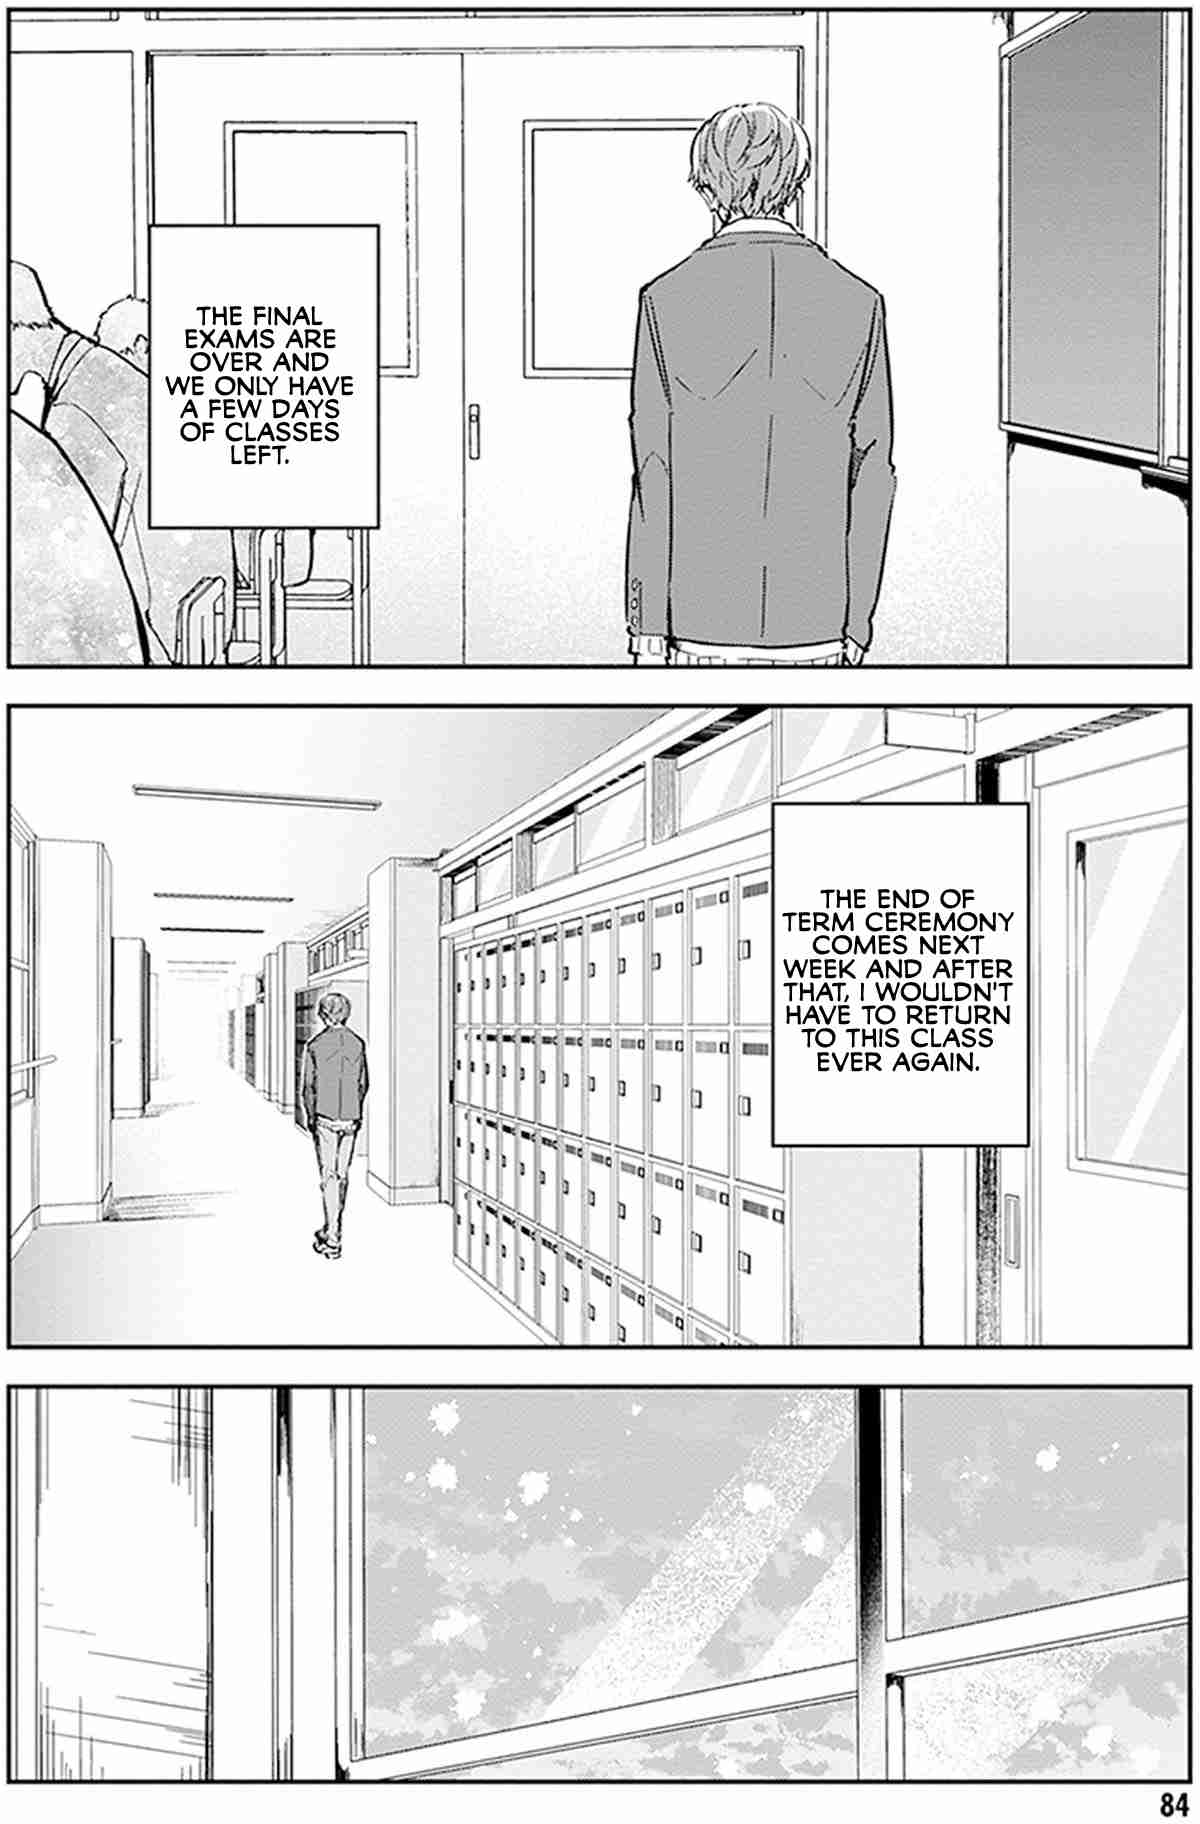 Hatsukoi Losstime Vol. 2 Ch. 7 I Hear the Ticking of Time, Part 1